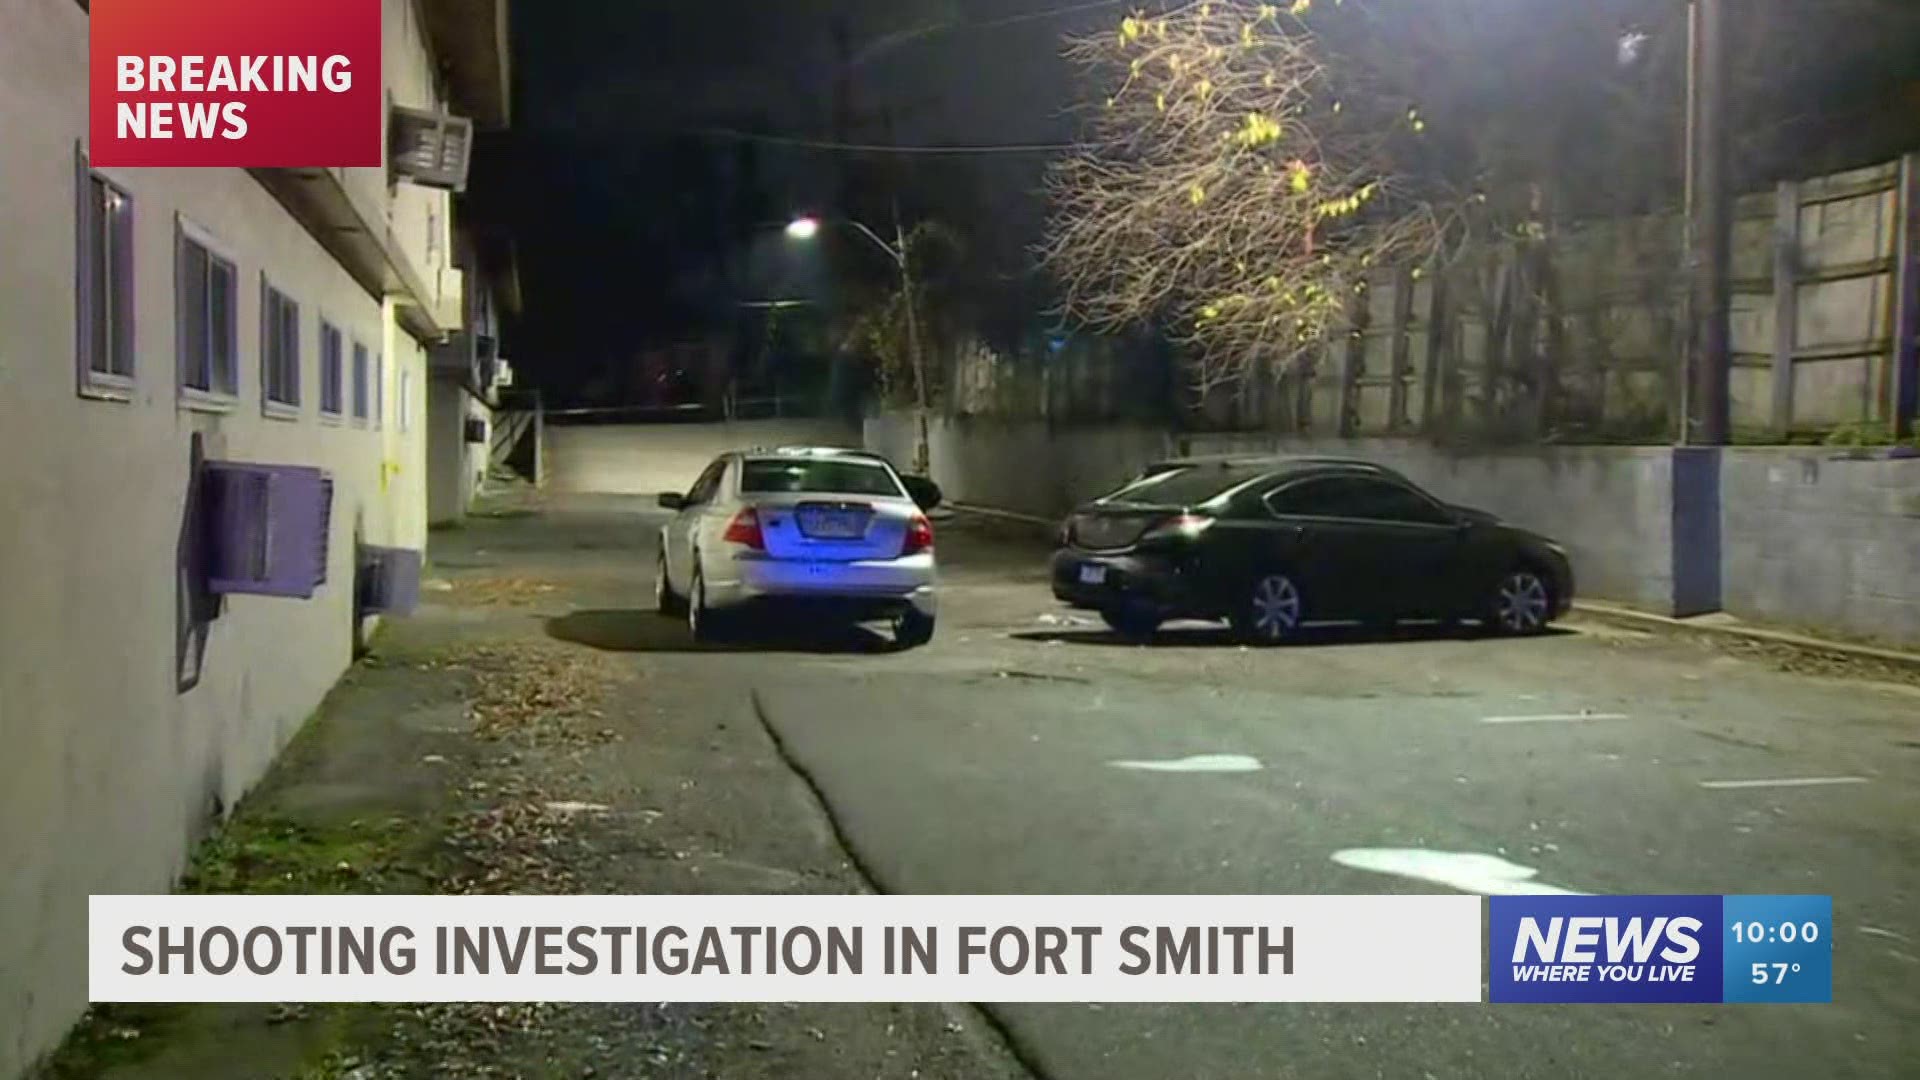 A shooting investigation is underway in Fort Smith.